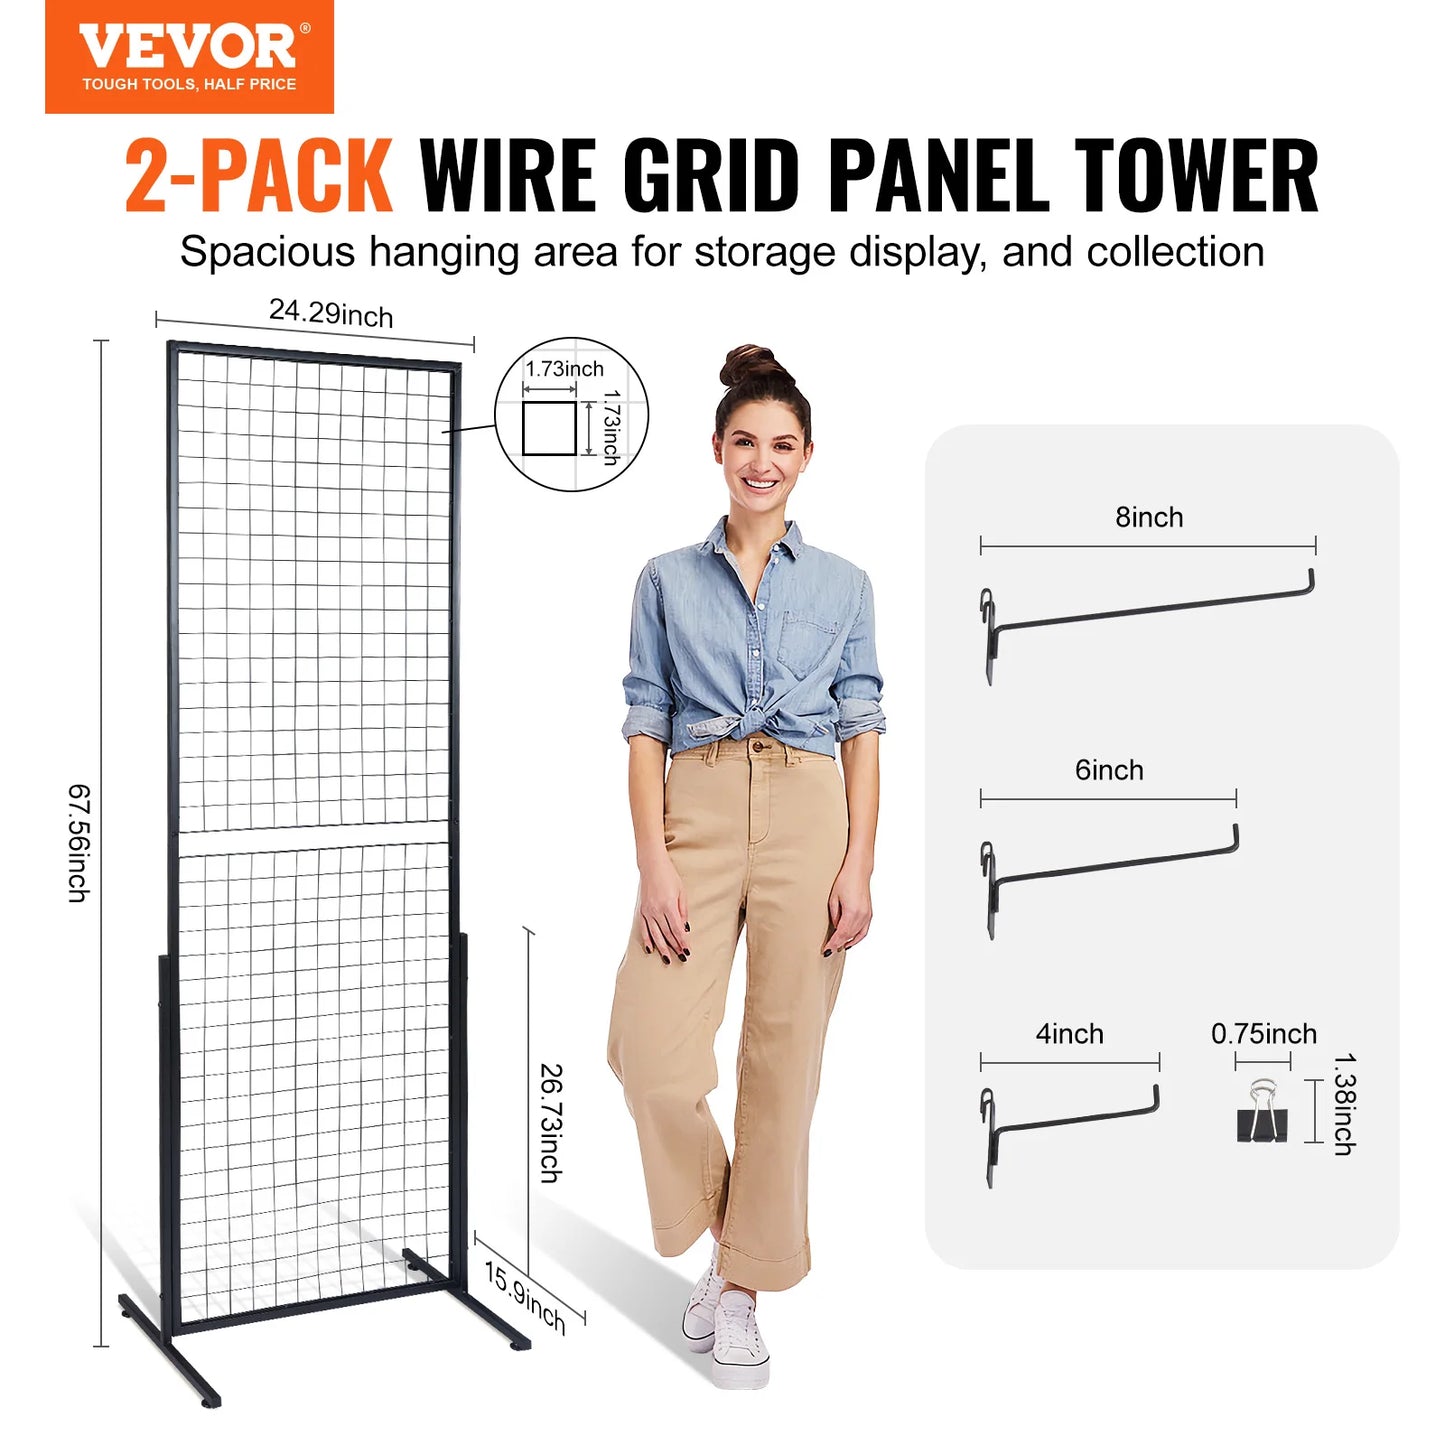 VEVOR Grid Wall Panels Tower Wire Gridwall Display Rack